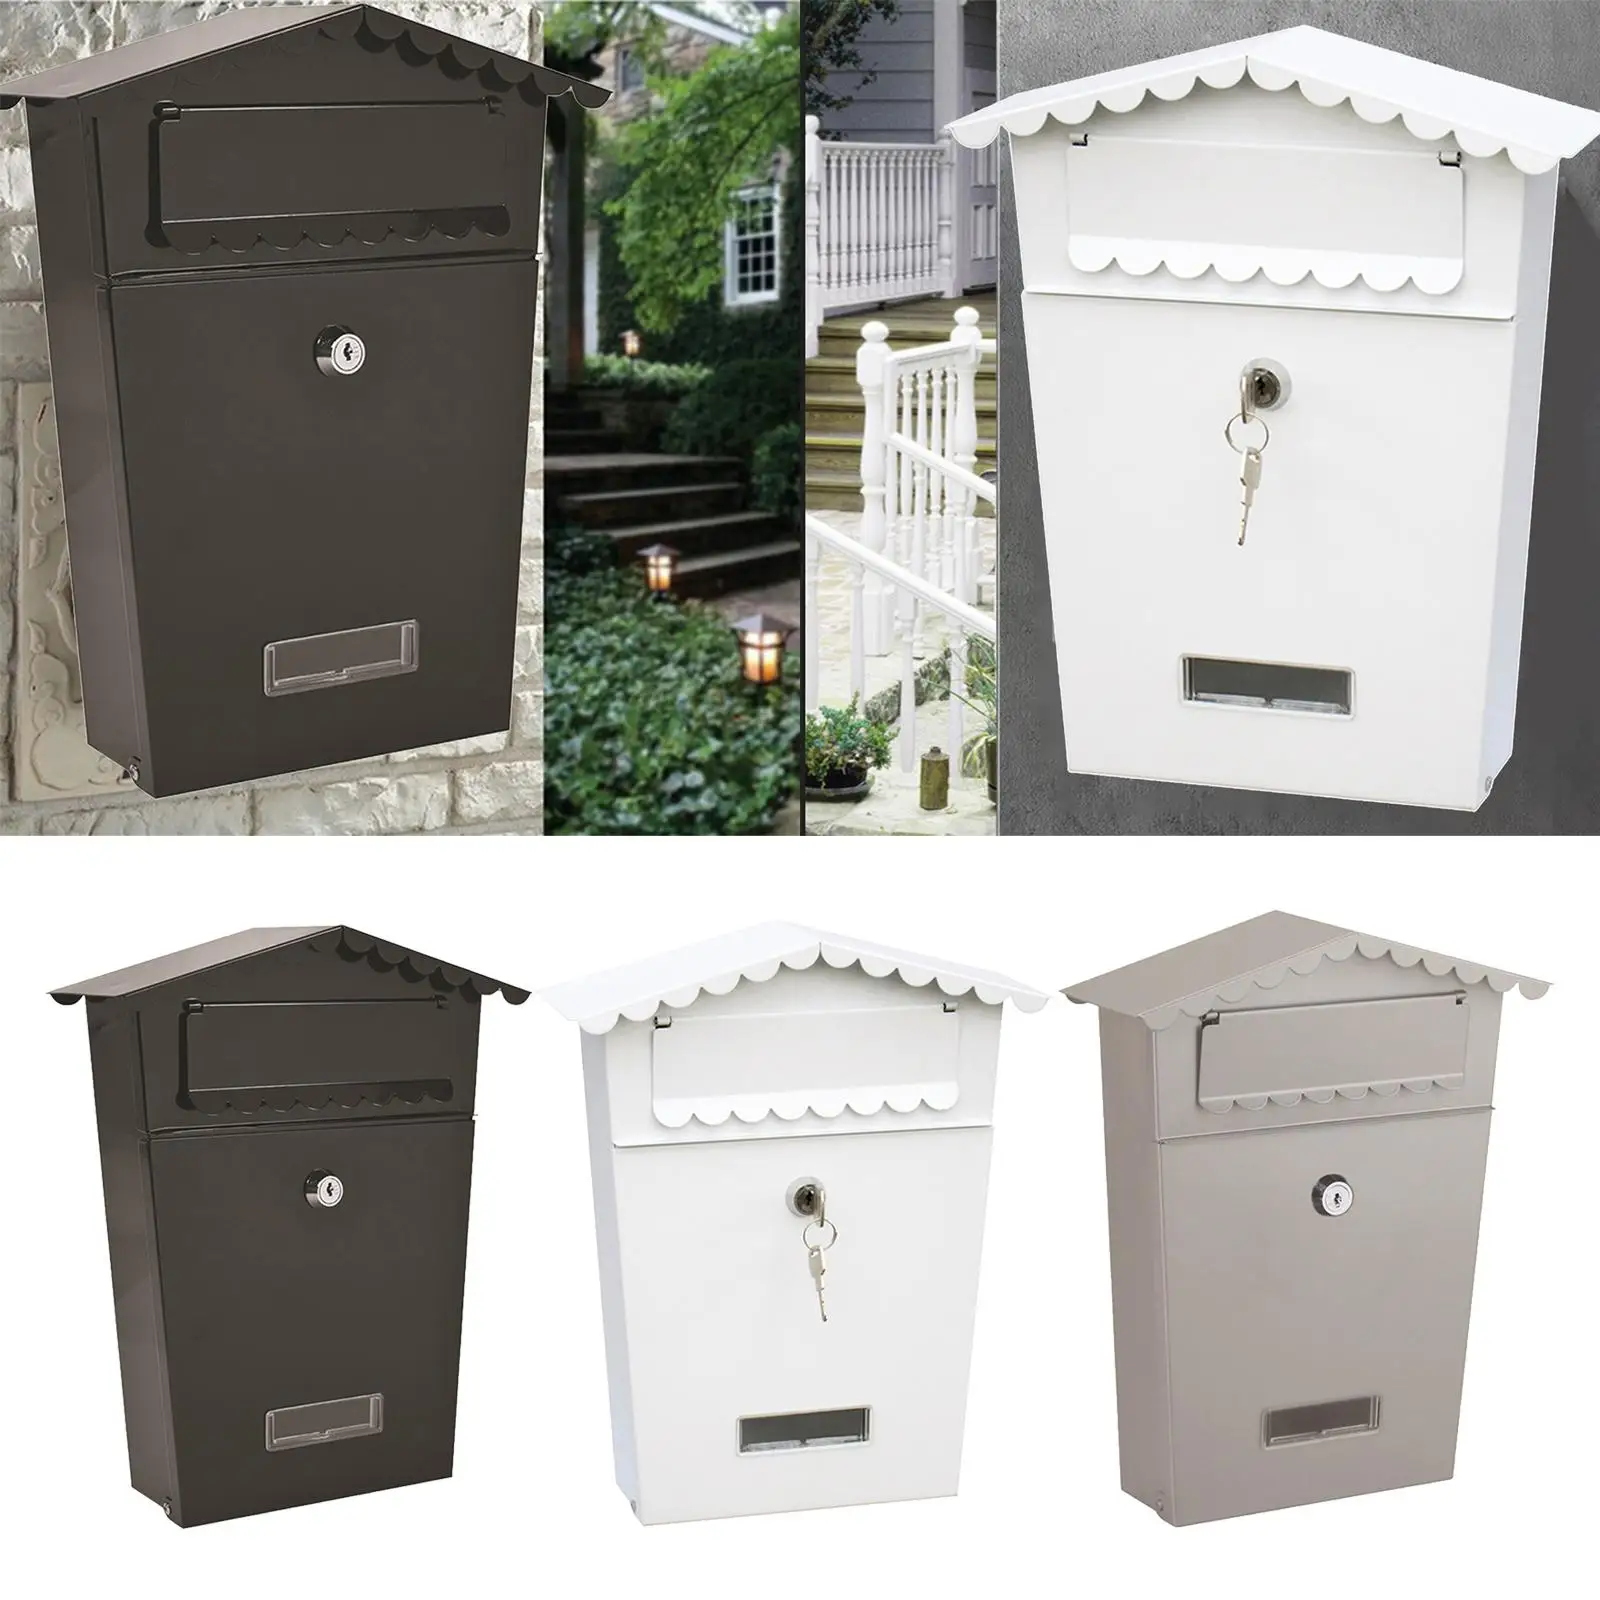 Mailbox Wall Mount Locking Mail Box with 2 Keys Letterbox Collection Boxes